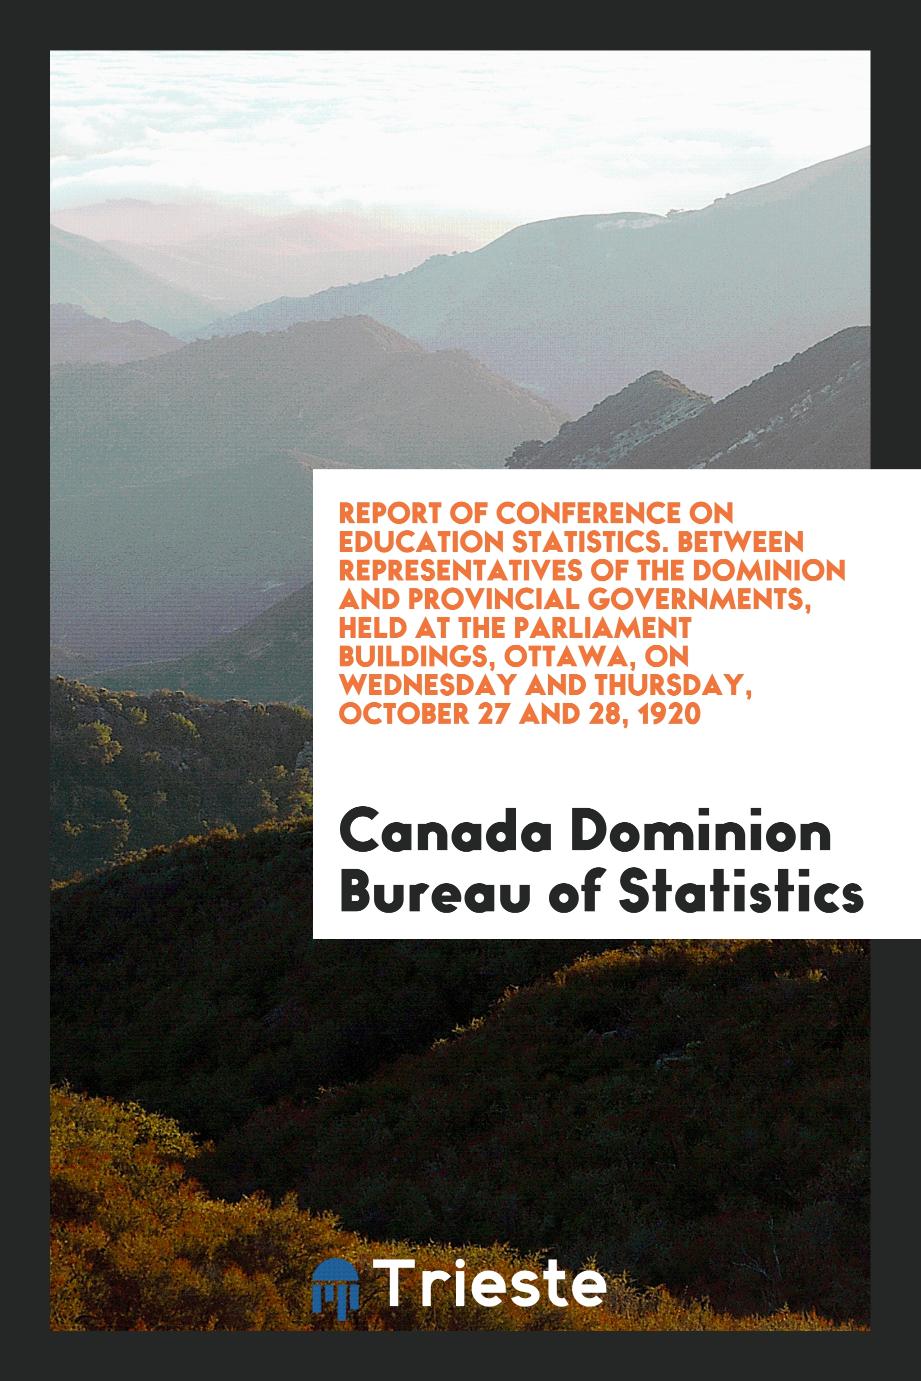 Report of Conference on education statistics. Between representatives of the dominion and provincial governments, held at the Parliament buildings, Ottawa, on Wednesday and Thursday, October 27 and 28, 1920